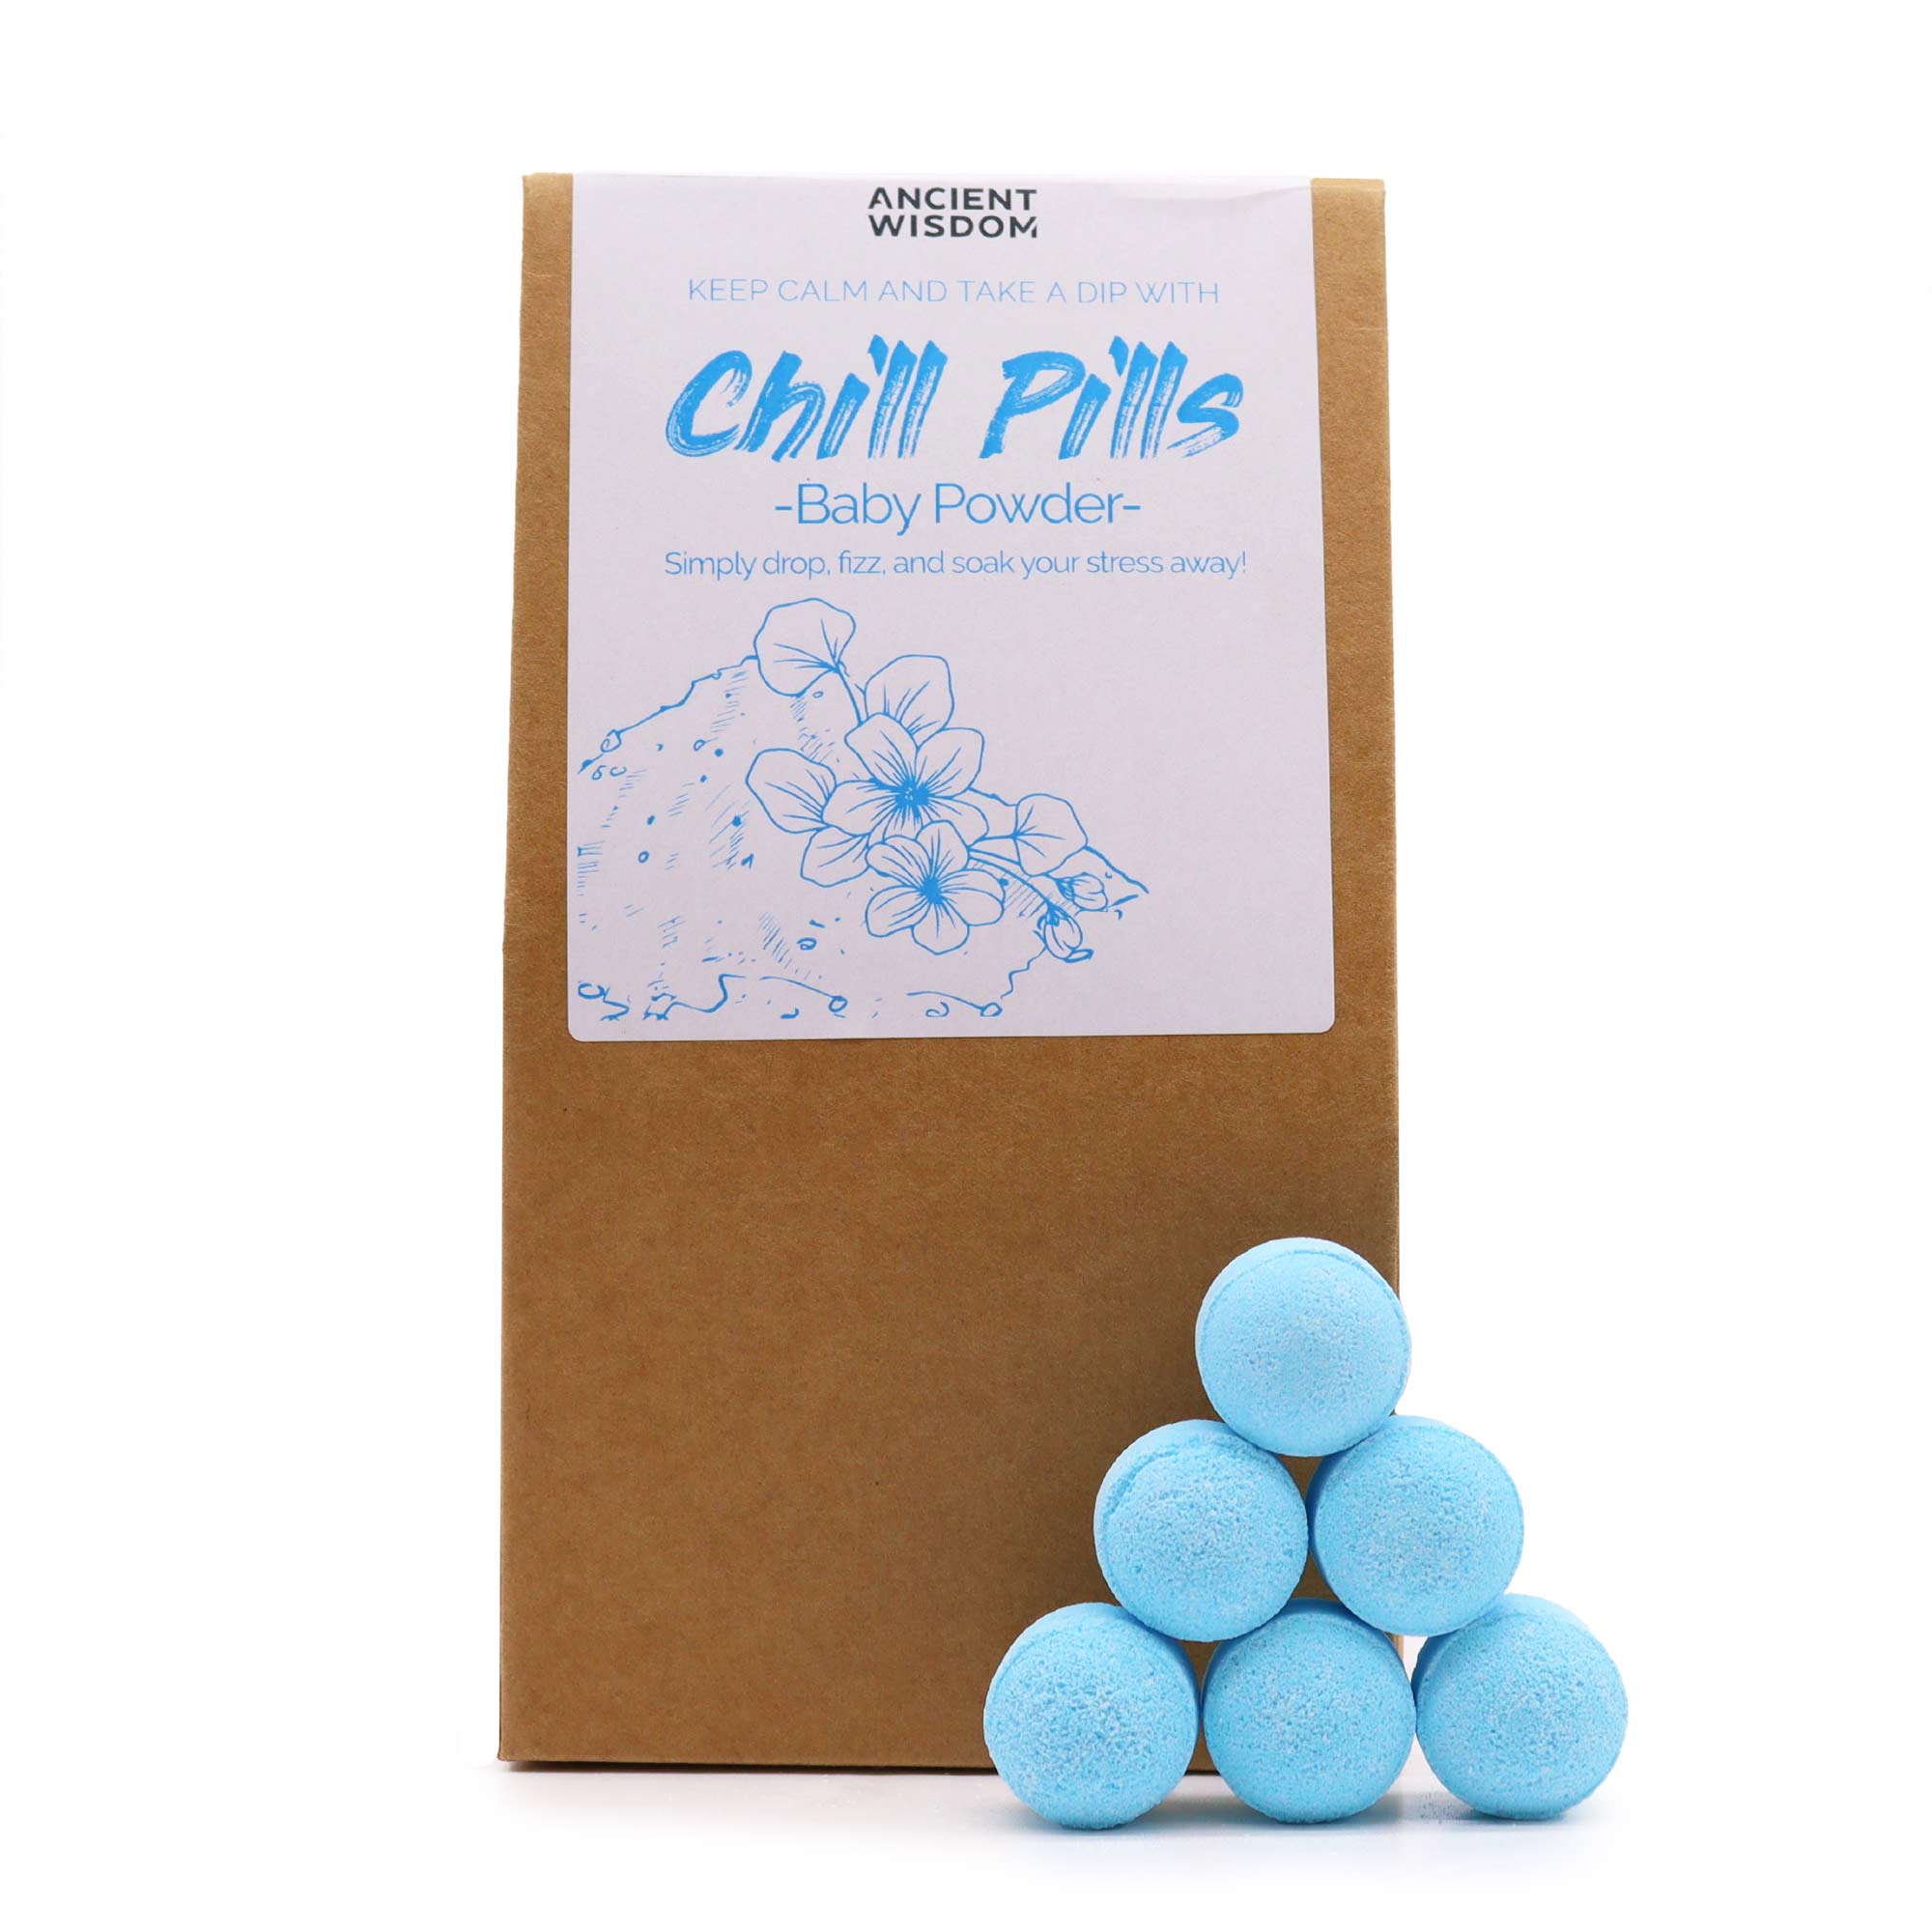 View Chill Pills Gift Pack 350g Baby Powder information